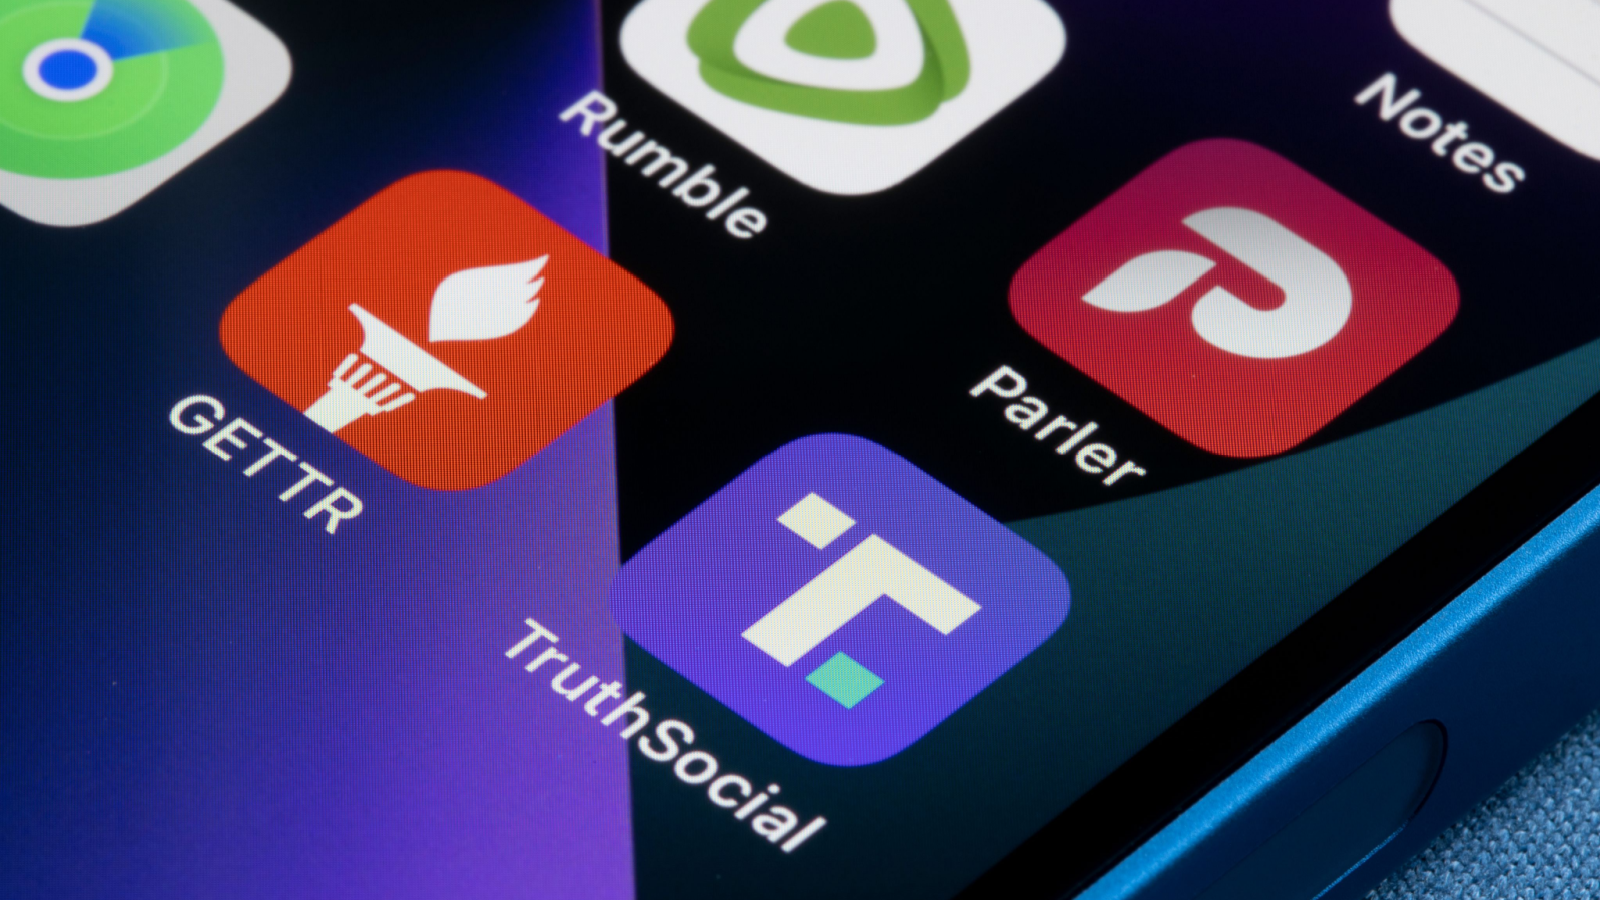 Truth Social (DWAC Stock), Gettr, Rumble (RUM) and Parler app icons are seen on an iPhone. Donald Trump's new social media venture, Truth Social, launched on Feb 20 in Apple's App Store.